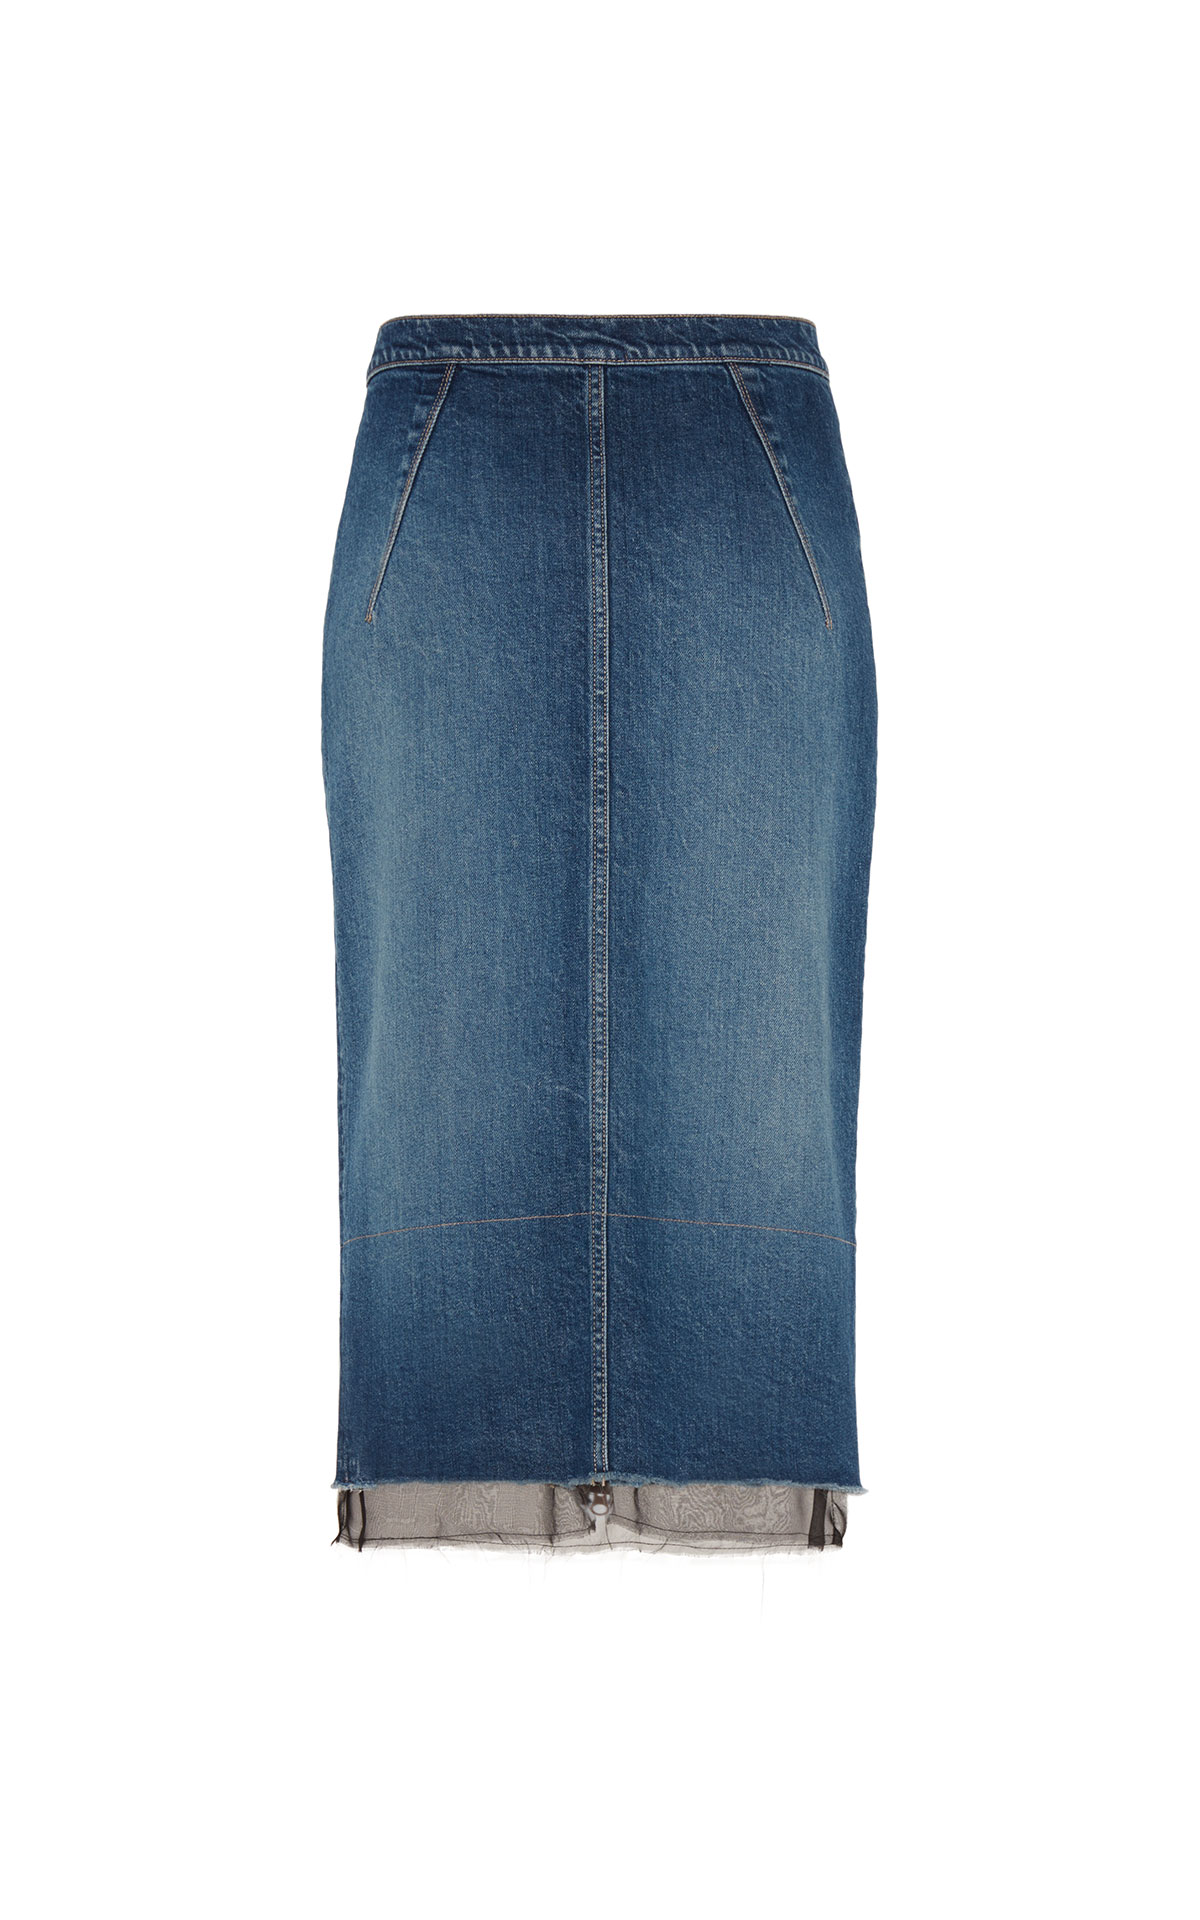 7 For All Mankind Pencil skirt indigo with chiffon from Bicester Village